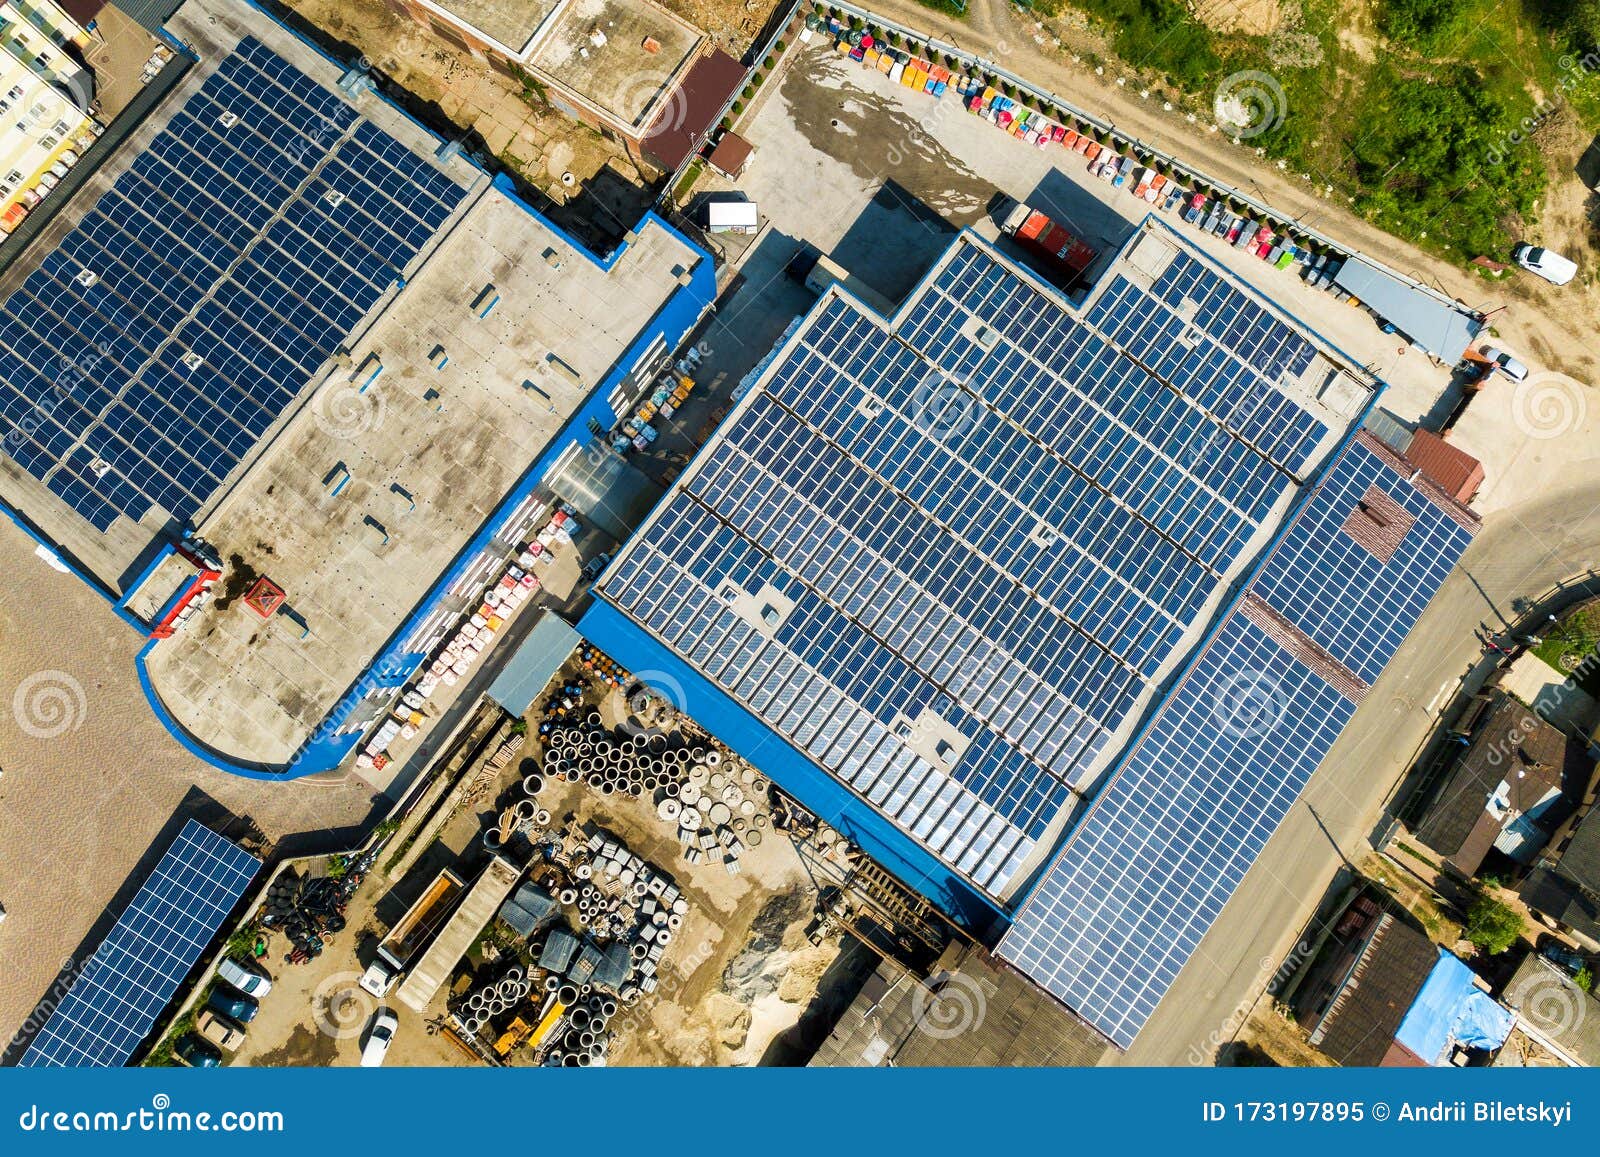 aerial view of many photo voltaic solar panels mounted of industrial building roof